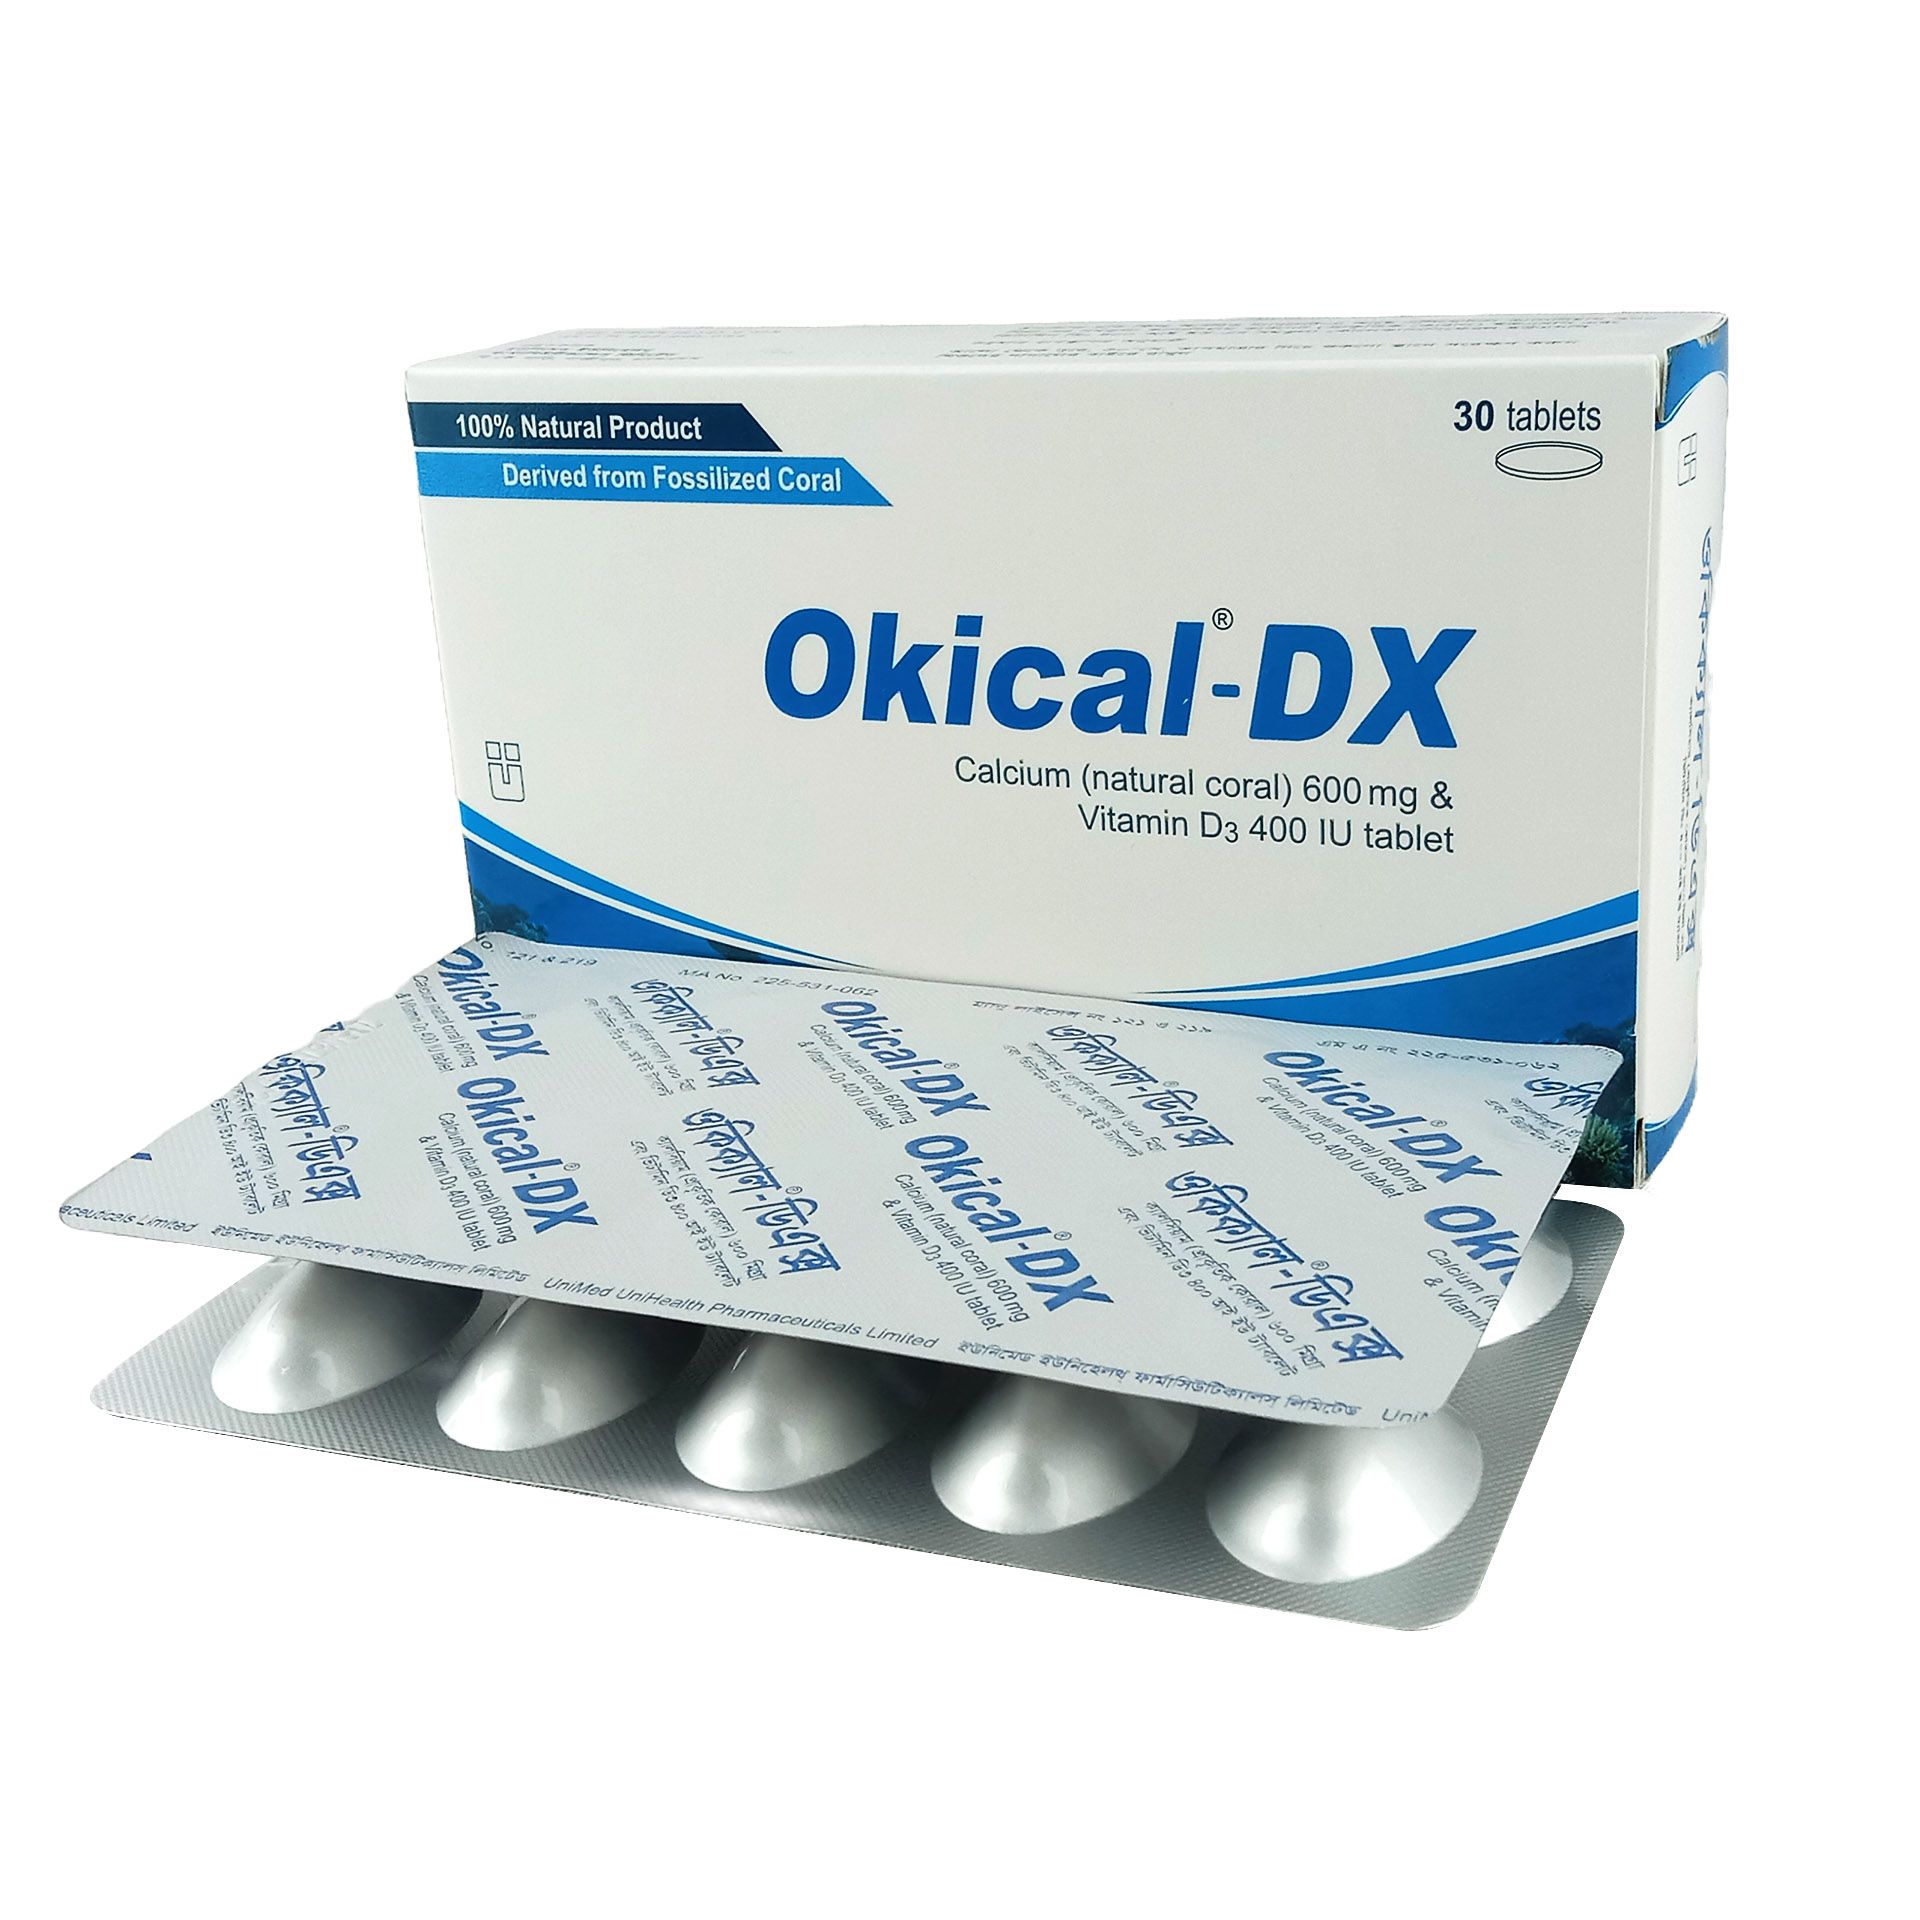 Okical-DX 600mg+400IU Tablet